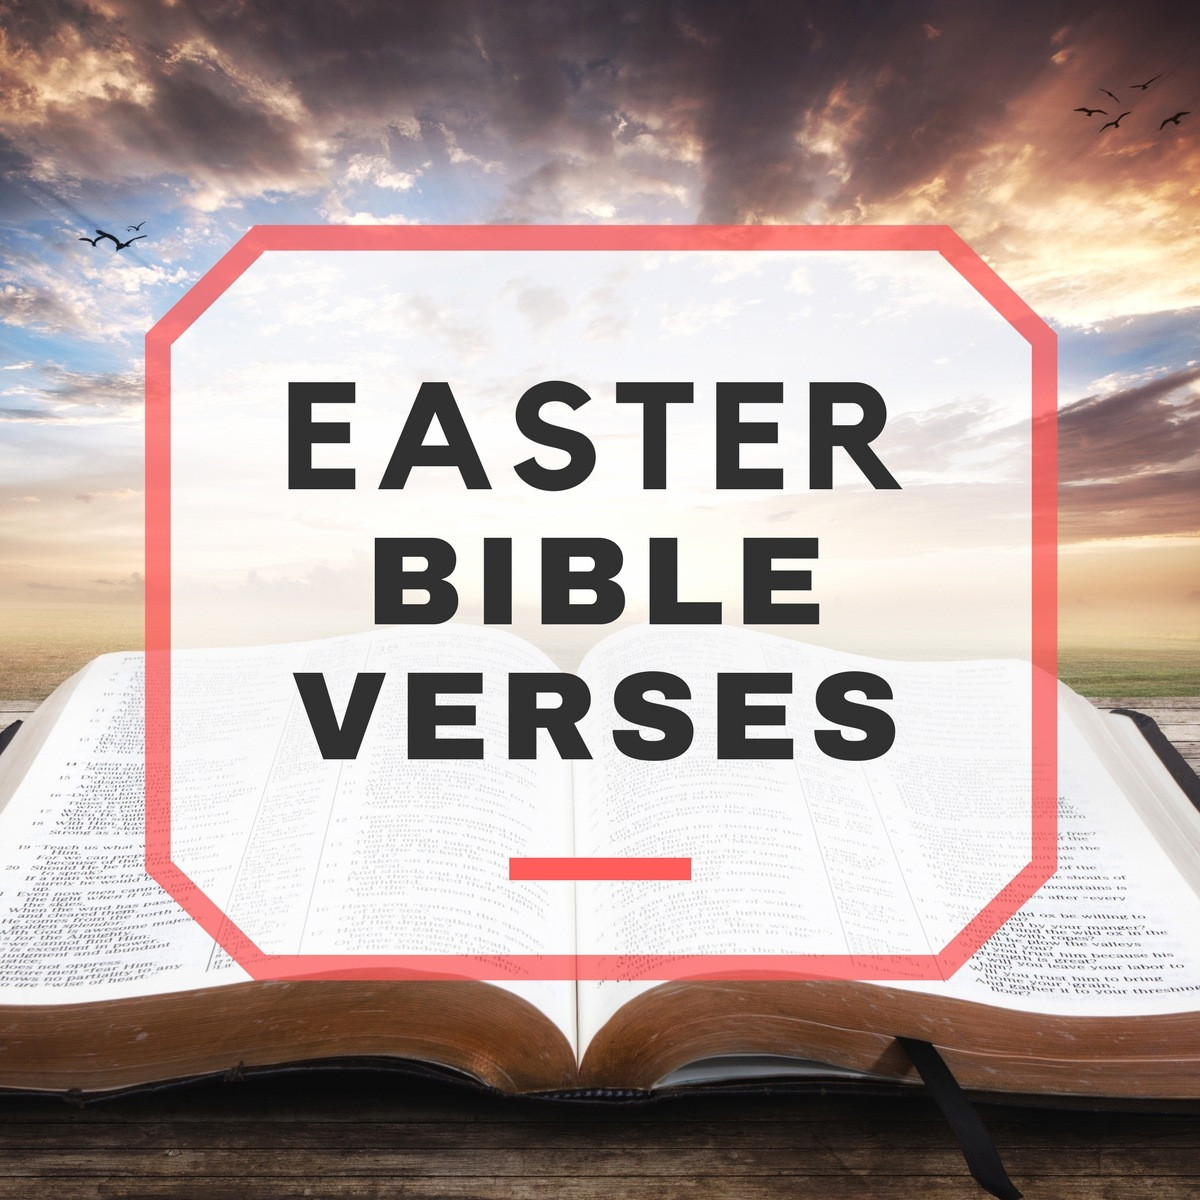 Easter Quote Bible
 Easter Bible Verses